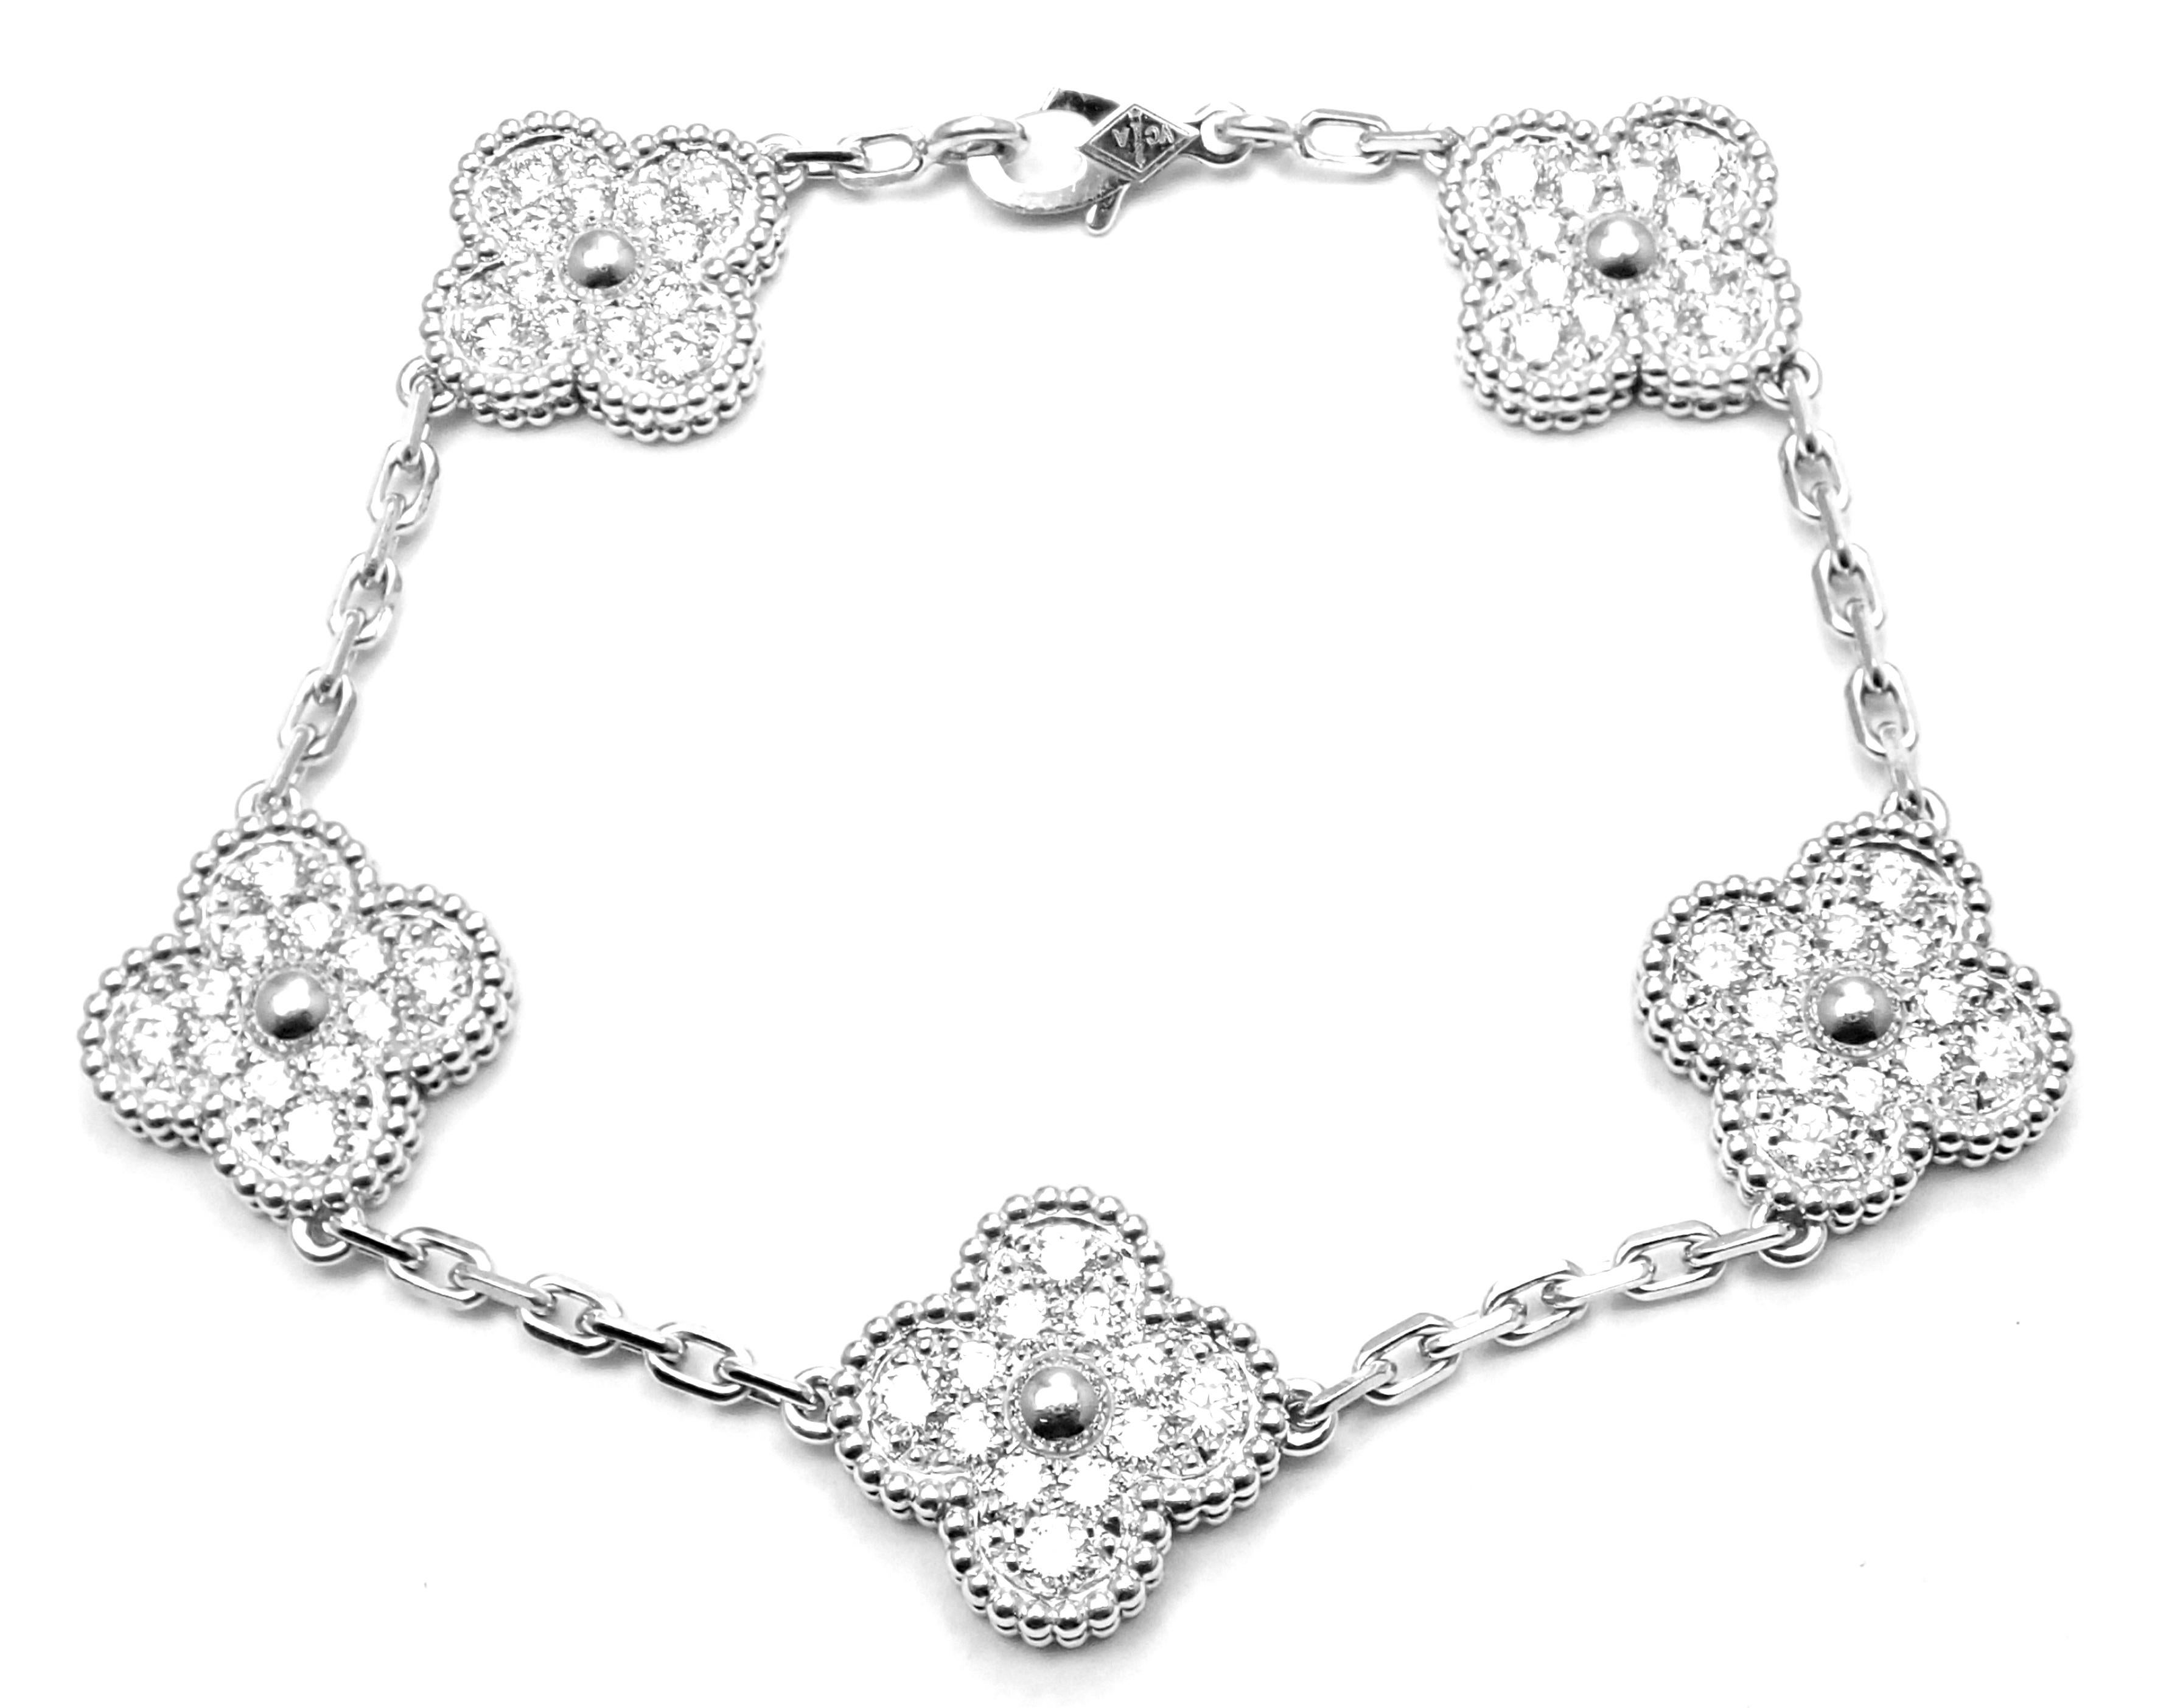 18k White Gold Diamond Vintage Alhambra Bracelet by Van Cleef & Arpels.
With 60 round brilliant cut diamonds VVS1 clarity, E color total weight approximately 2.42ct
This bracelet comes with Van Cleef & Arpels box and certificate of authenticity from